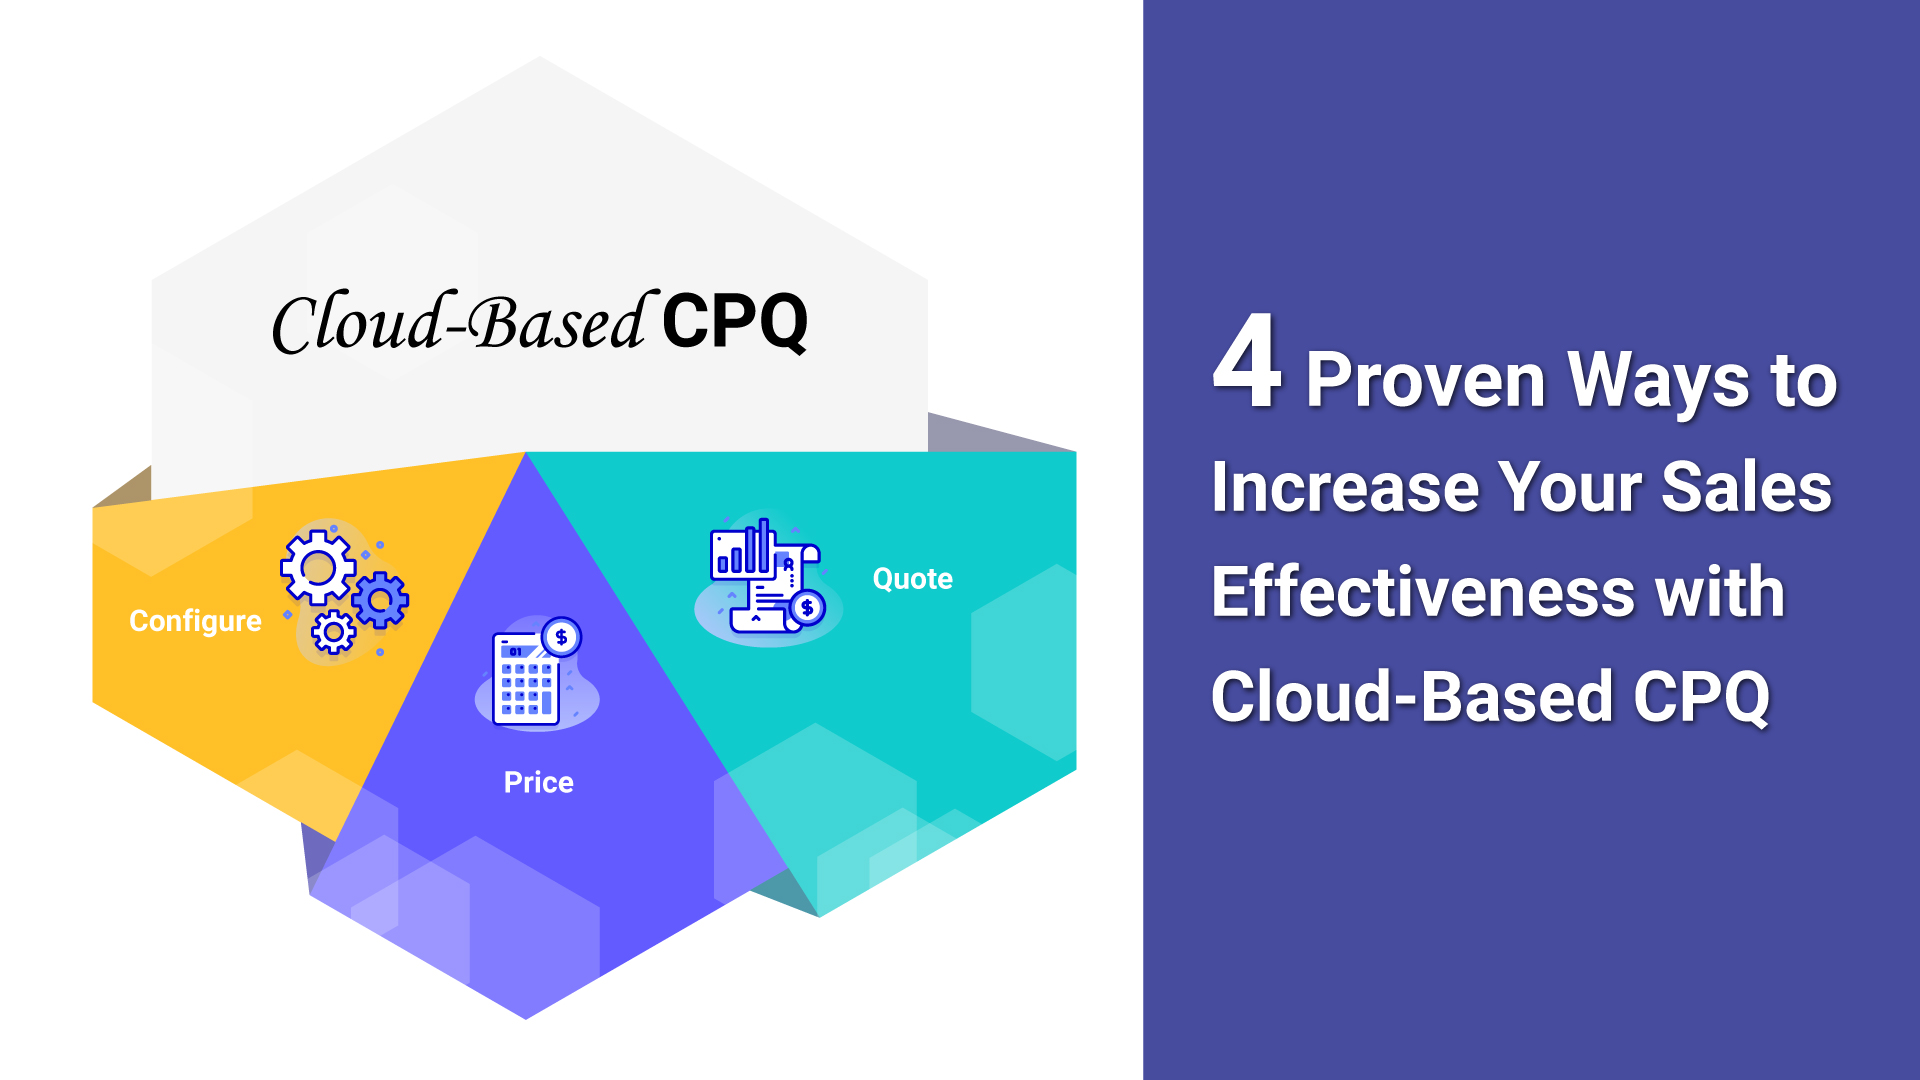 4 Proven Ways to Increase Your Sales Effectiveness with Cloud-Based CPQ